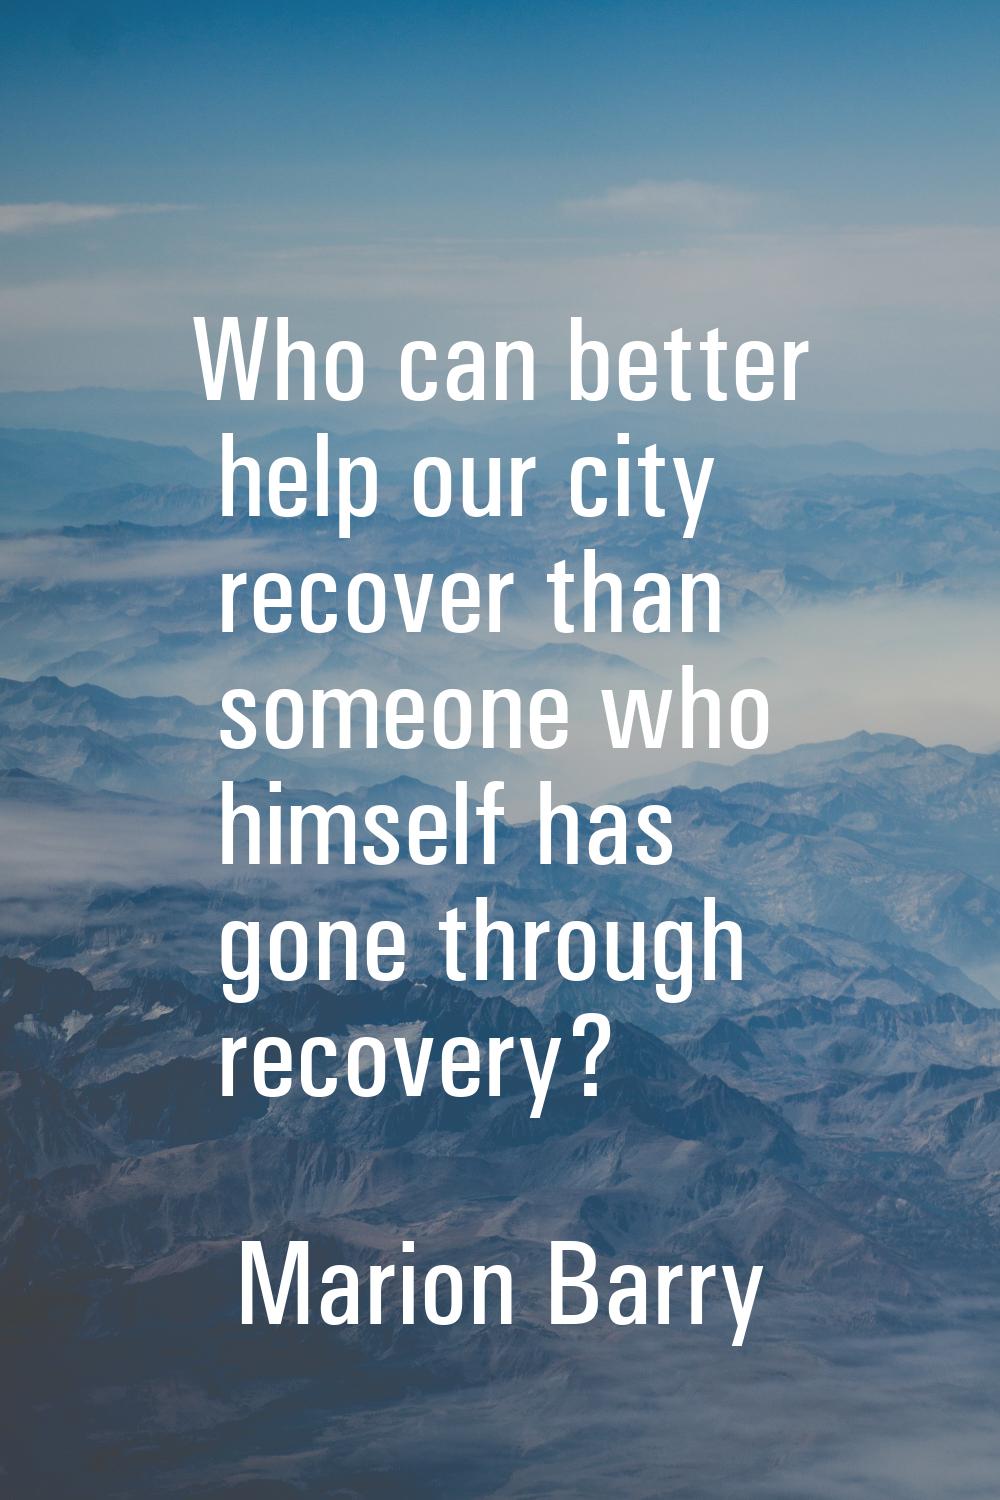 Who can better help our city recover than someone who himself has gone through recovery?